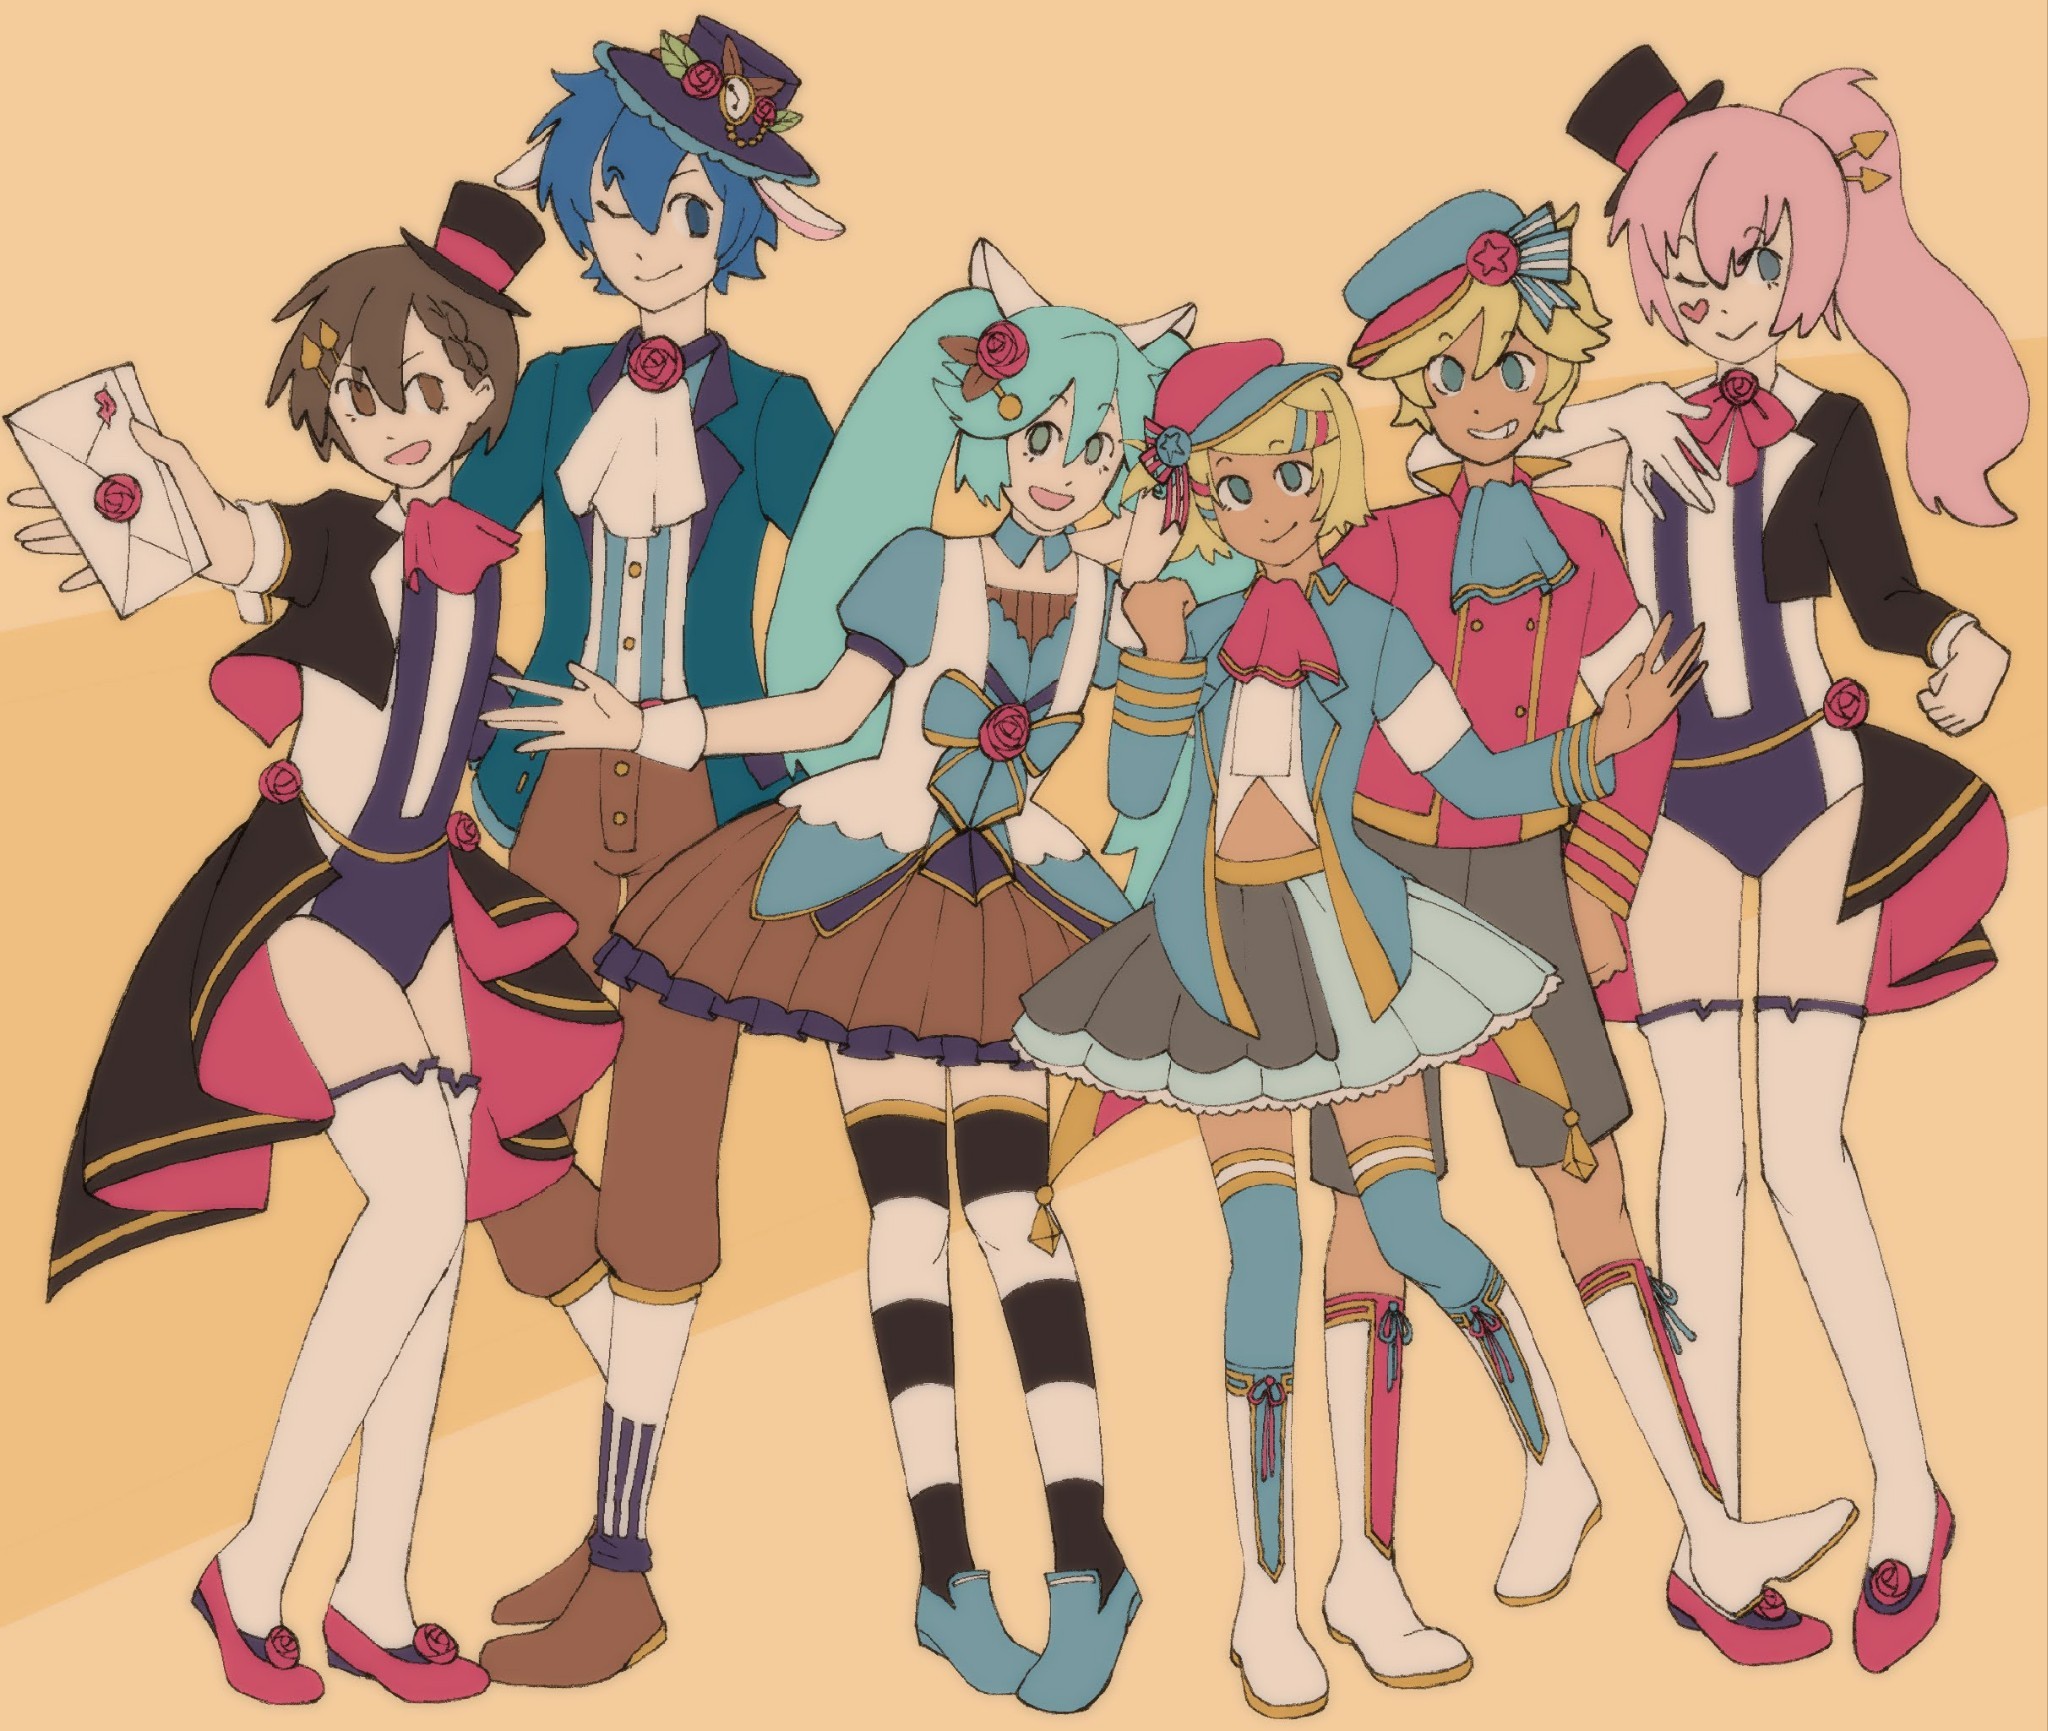 digital drawing of vocaloid characters all standing next to each other. meiko, kaito, miku, rin, len, and then luka. their outfits are inspired by alice in wonderland characters